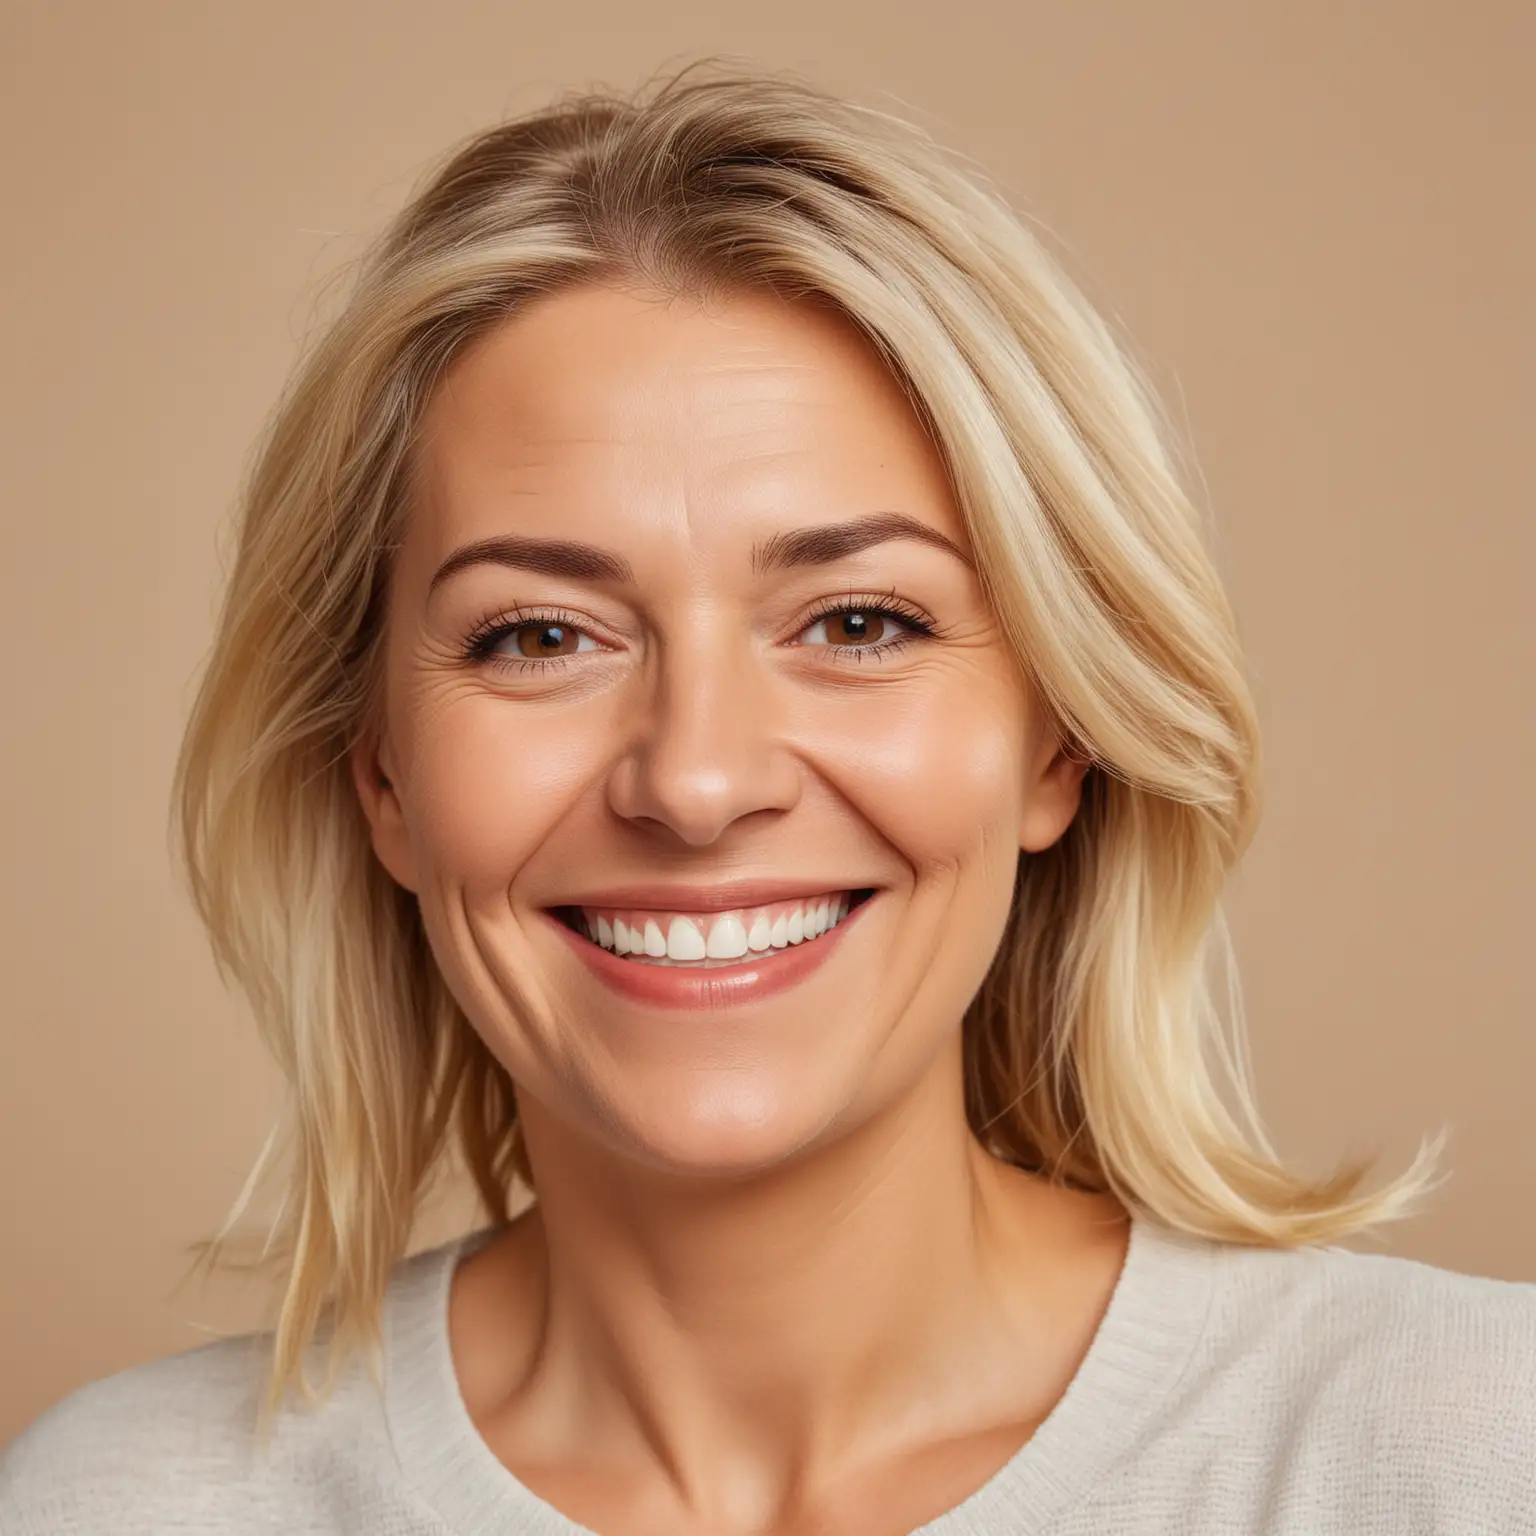 Smiling MiddleAged Woman with Blonde Hair in Candid Portrait